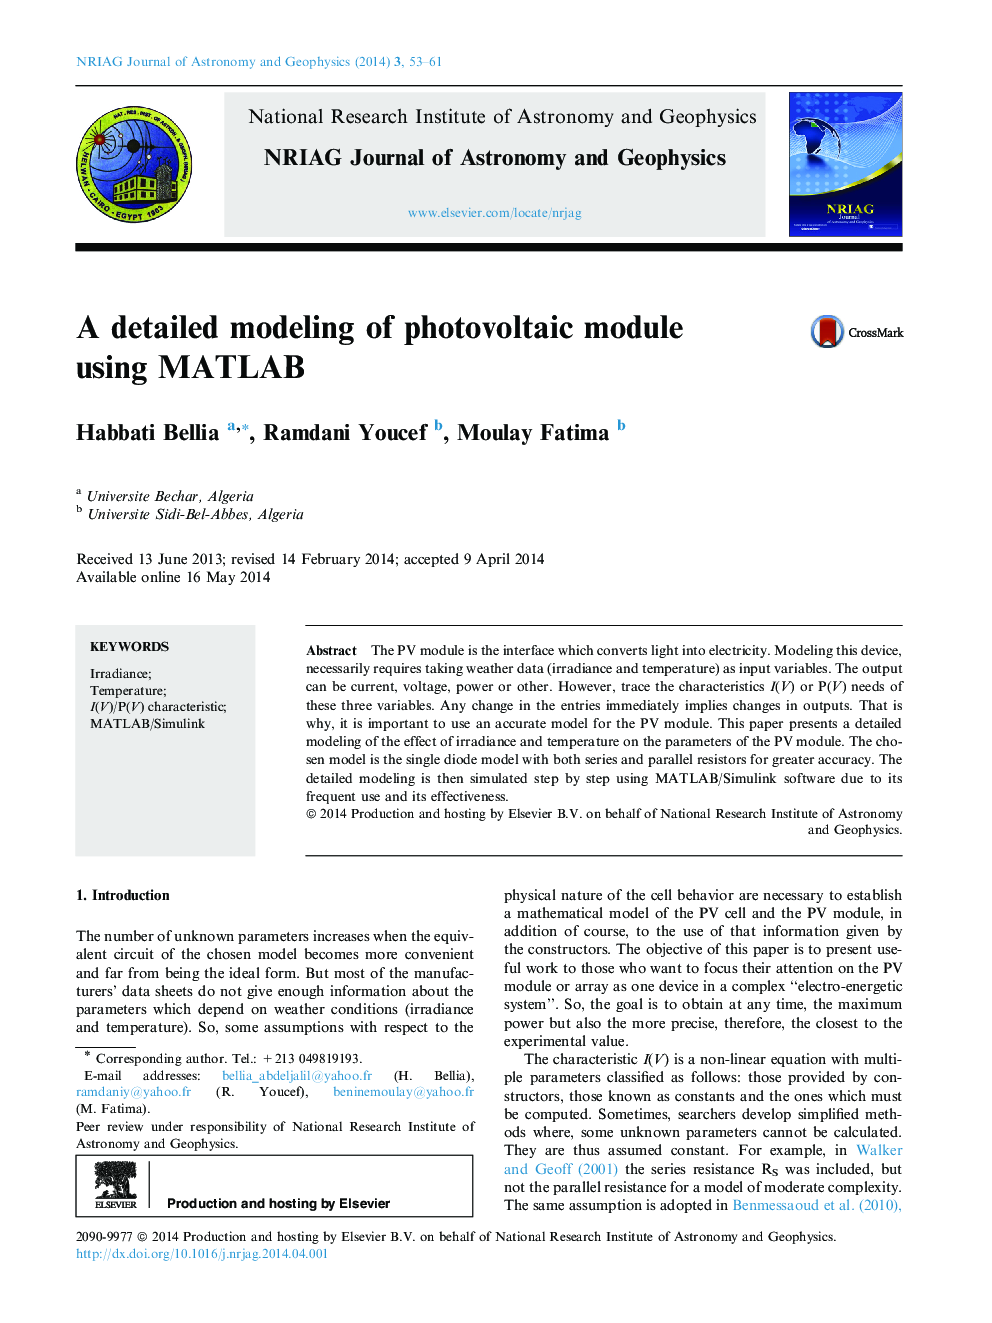 A detailed modeling of photovoltaic module using MATLAB 